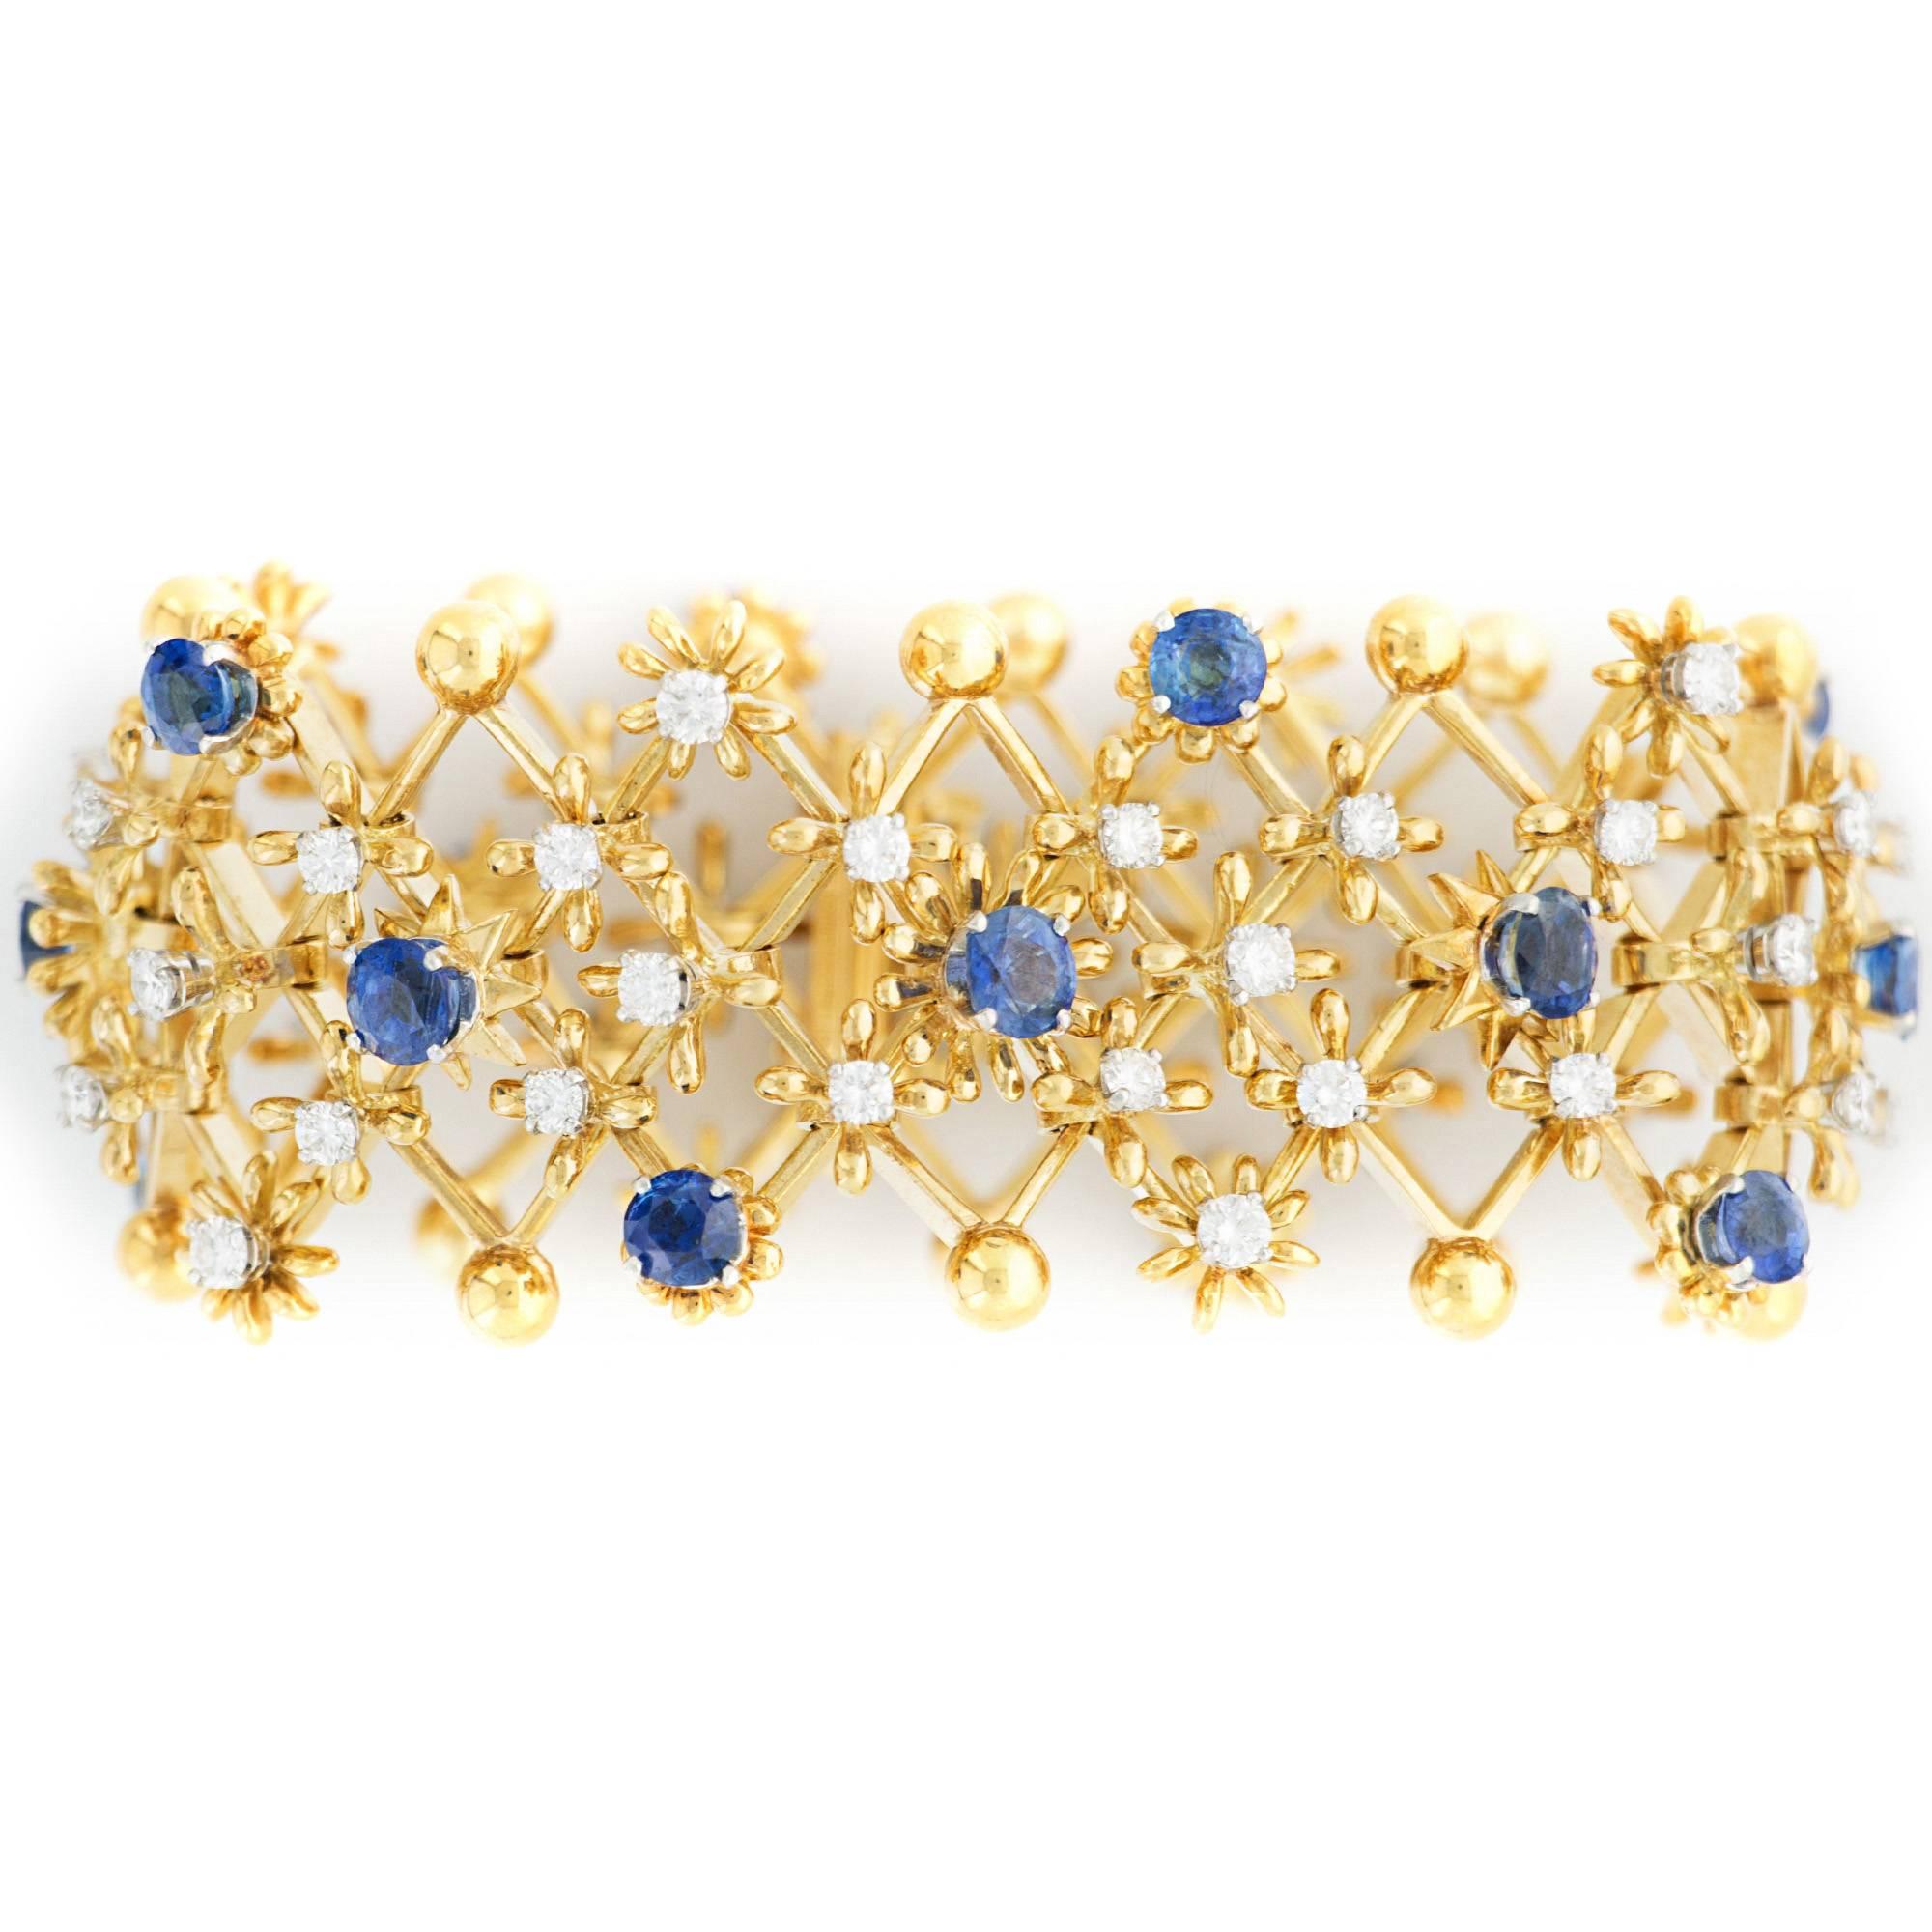 An absolutely beautiful flexible and wide bracelet composed of cross links with Sapphire and Diamond segments. Signed Tiffany Schlumberger 18k. 

Circa late 1960's.